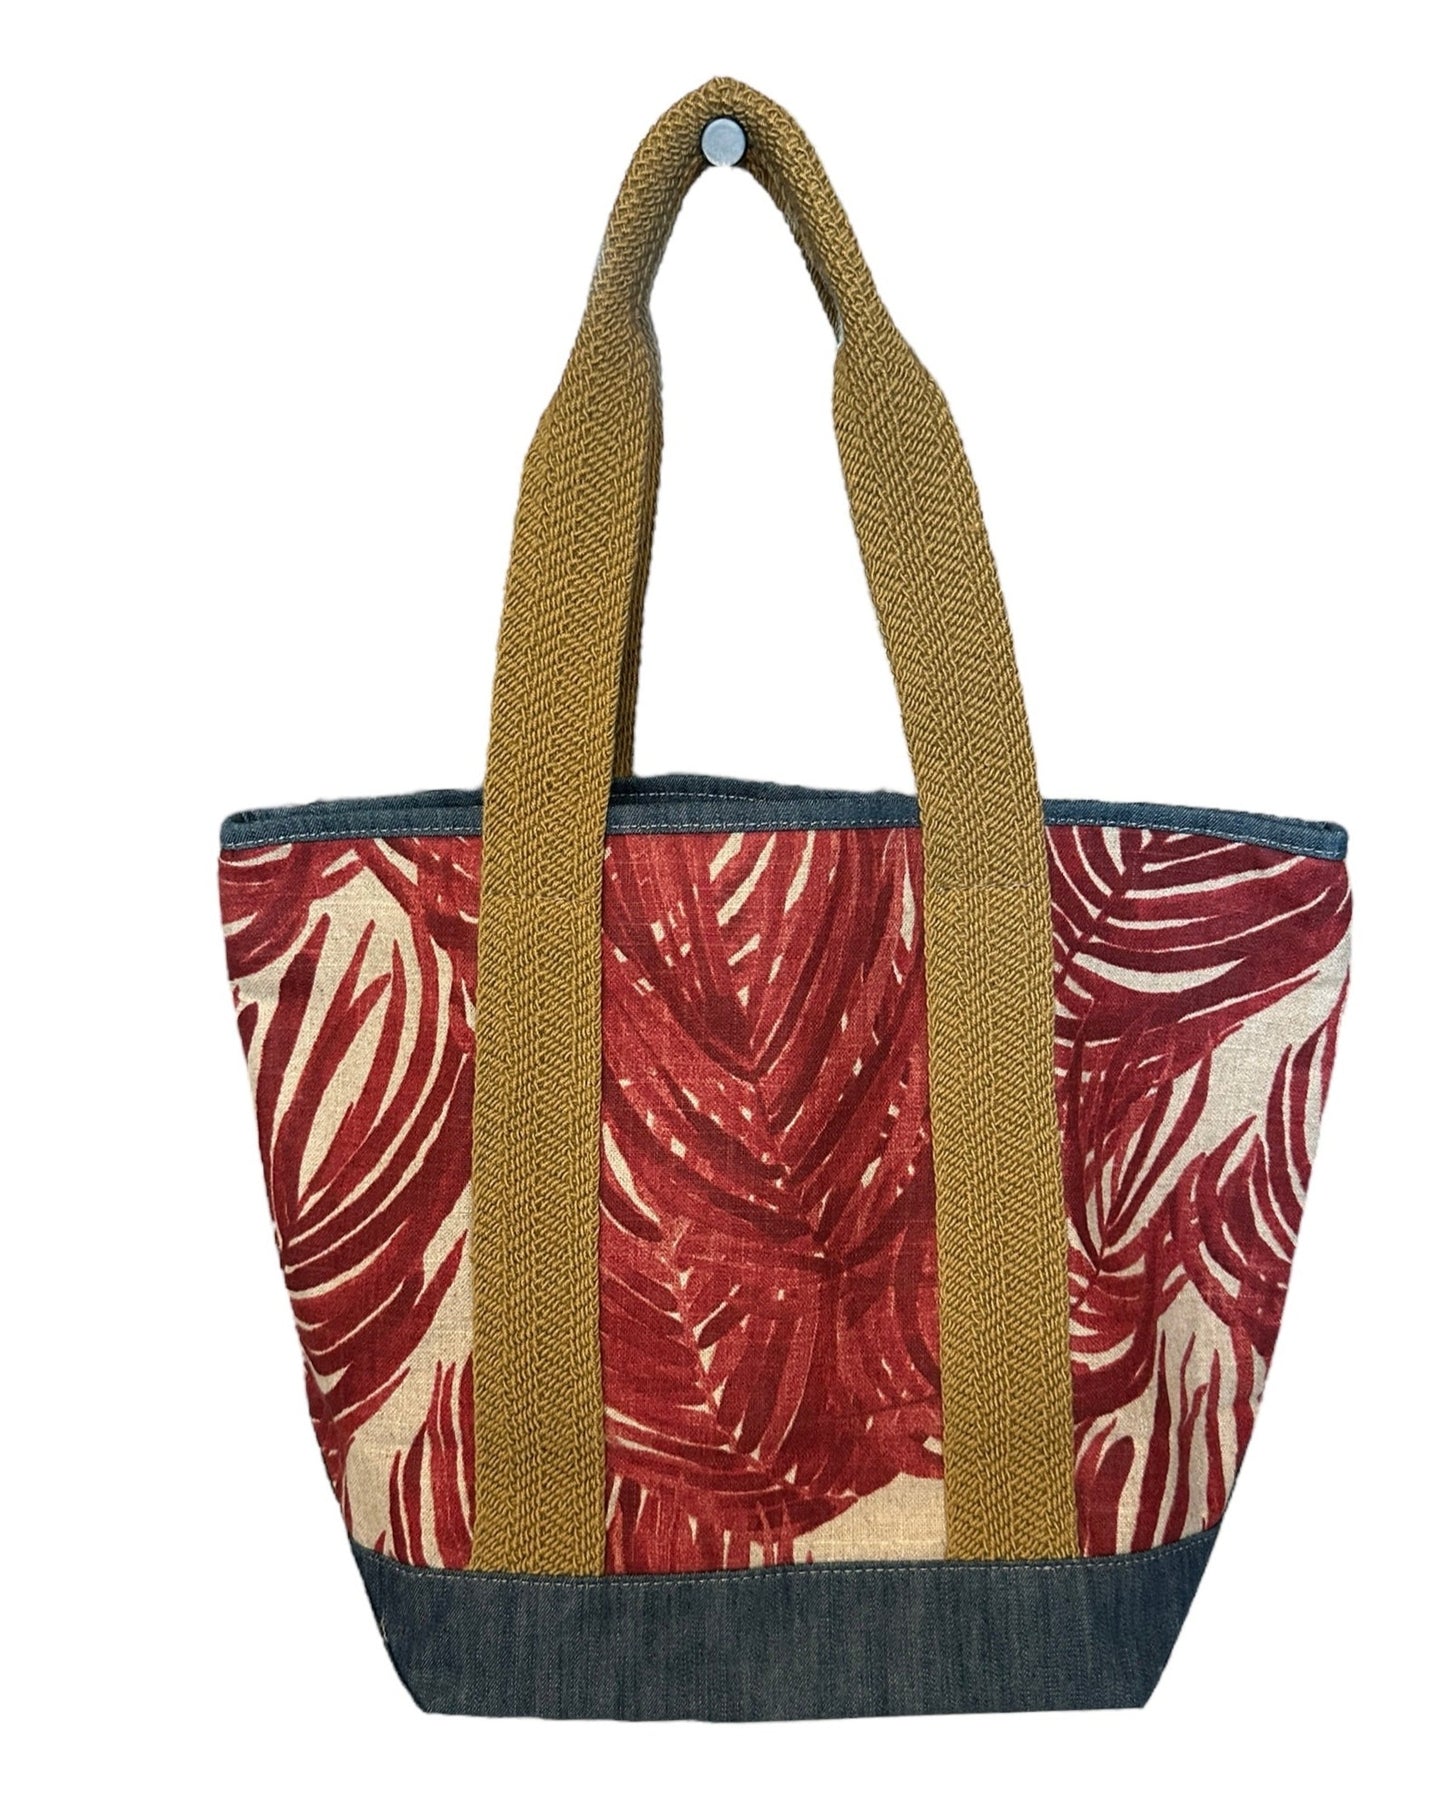 Roomy tote for beach or work!